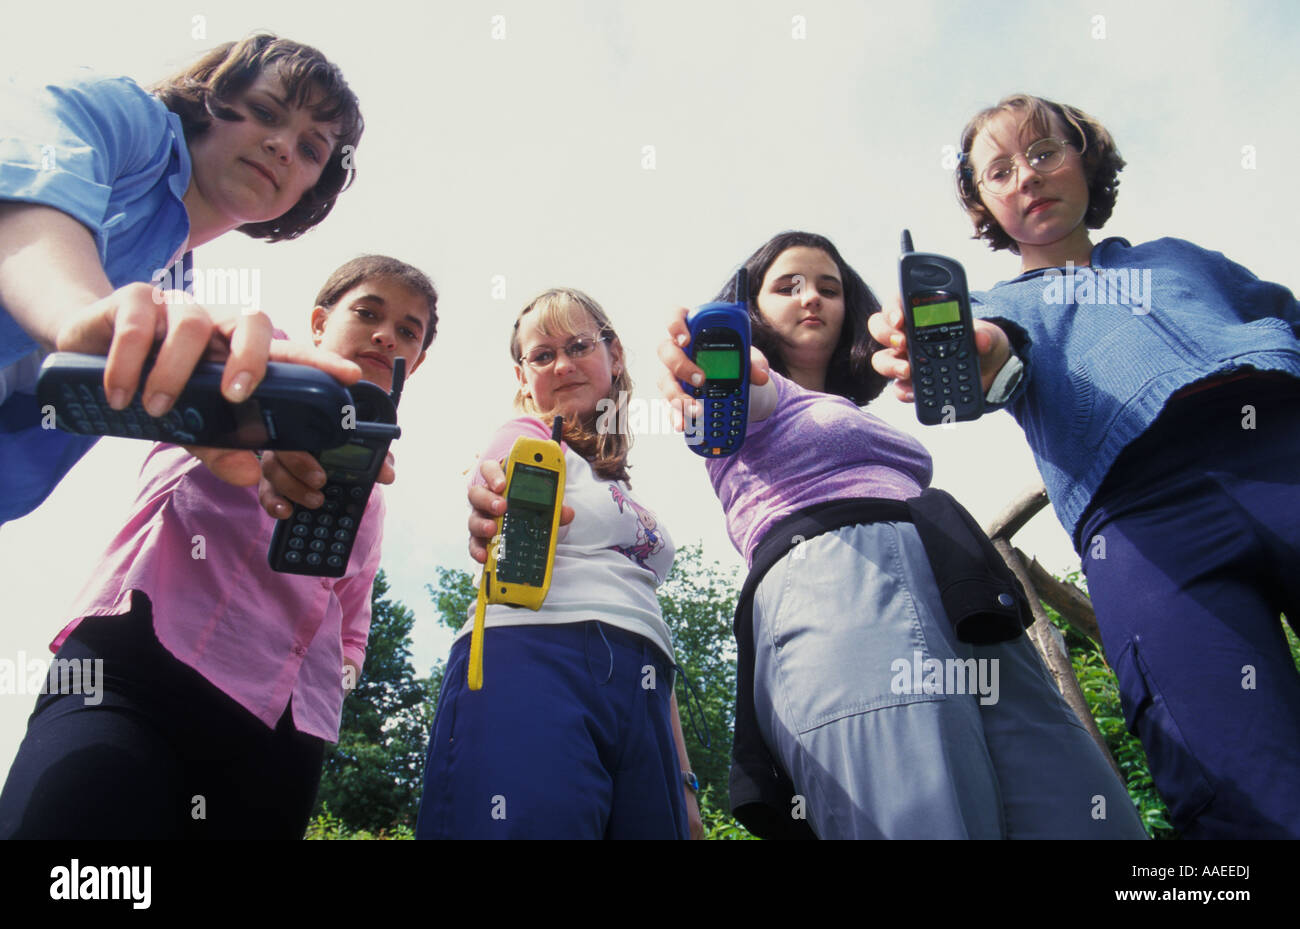 low angle view of group of teenage girls with variety of mobile phones Stock Photo